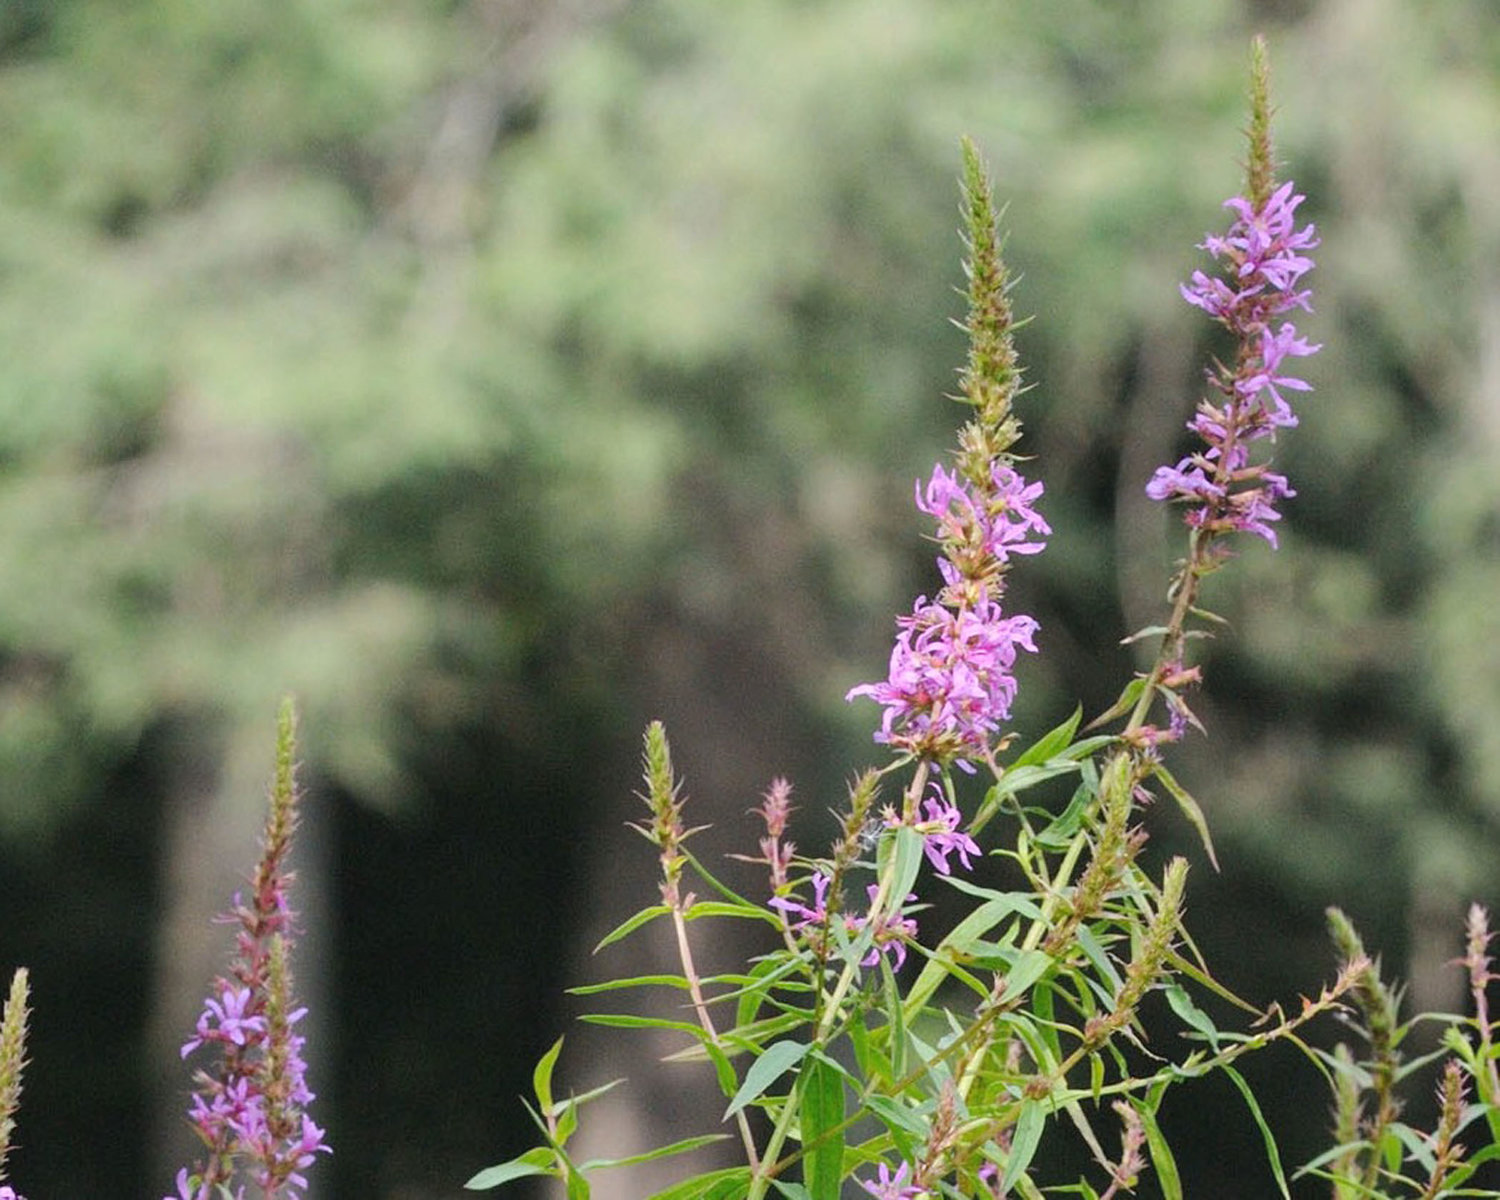 This is a flowering purple loosestrife plant showing the flower or inflorescence. If you cut or pull them by the roots when flowering, burn the plants, or dispose of them in the trash to prevent the spread of seeds.